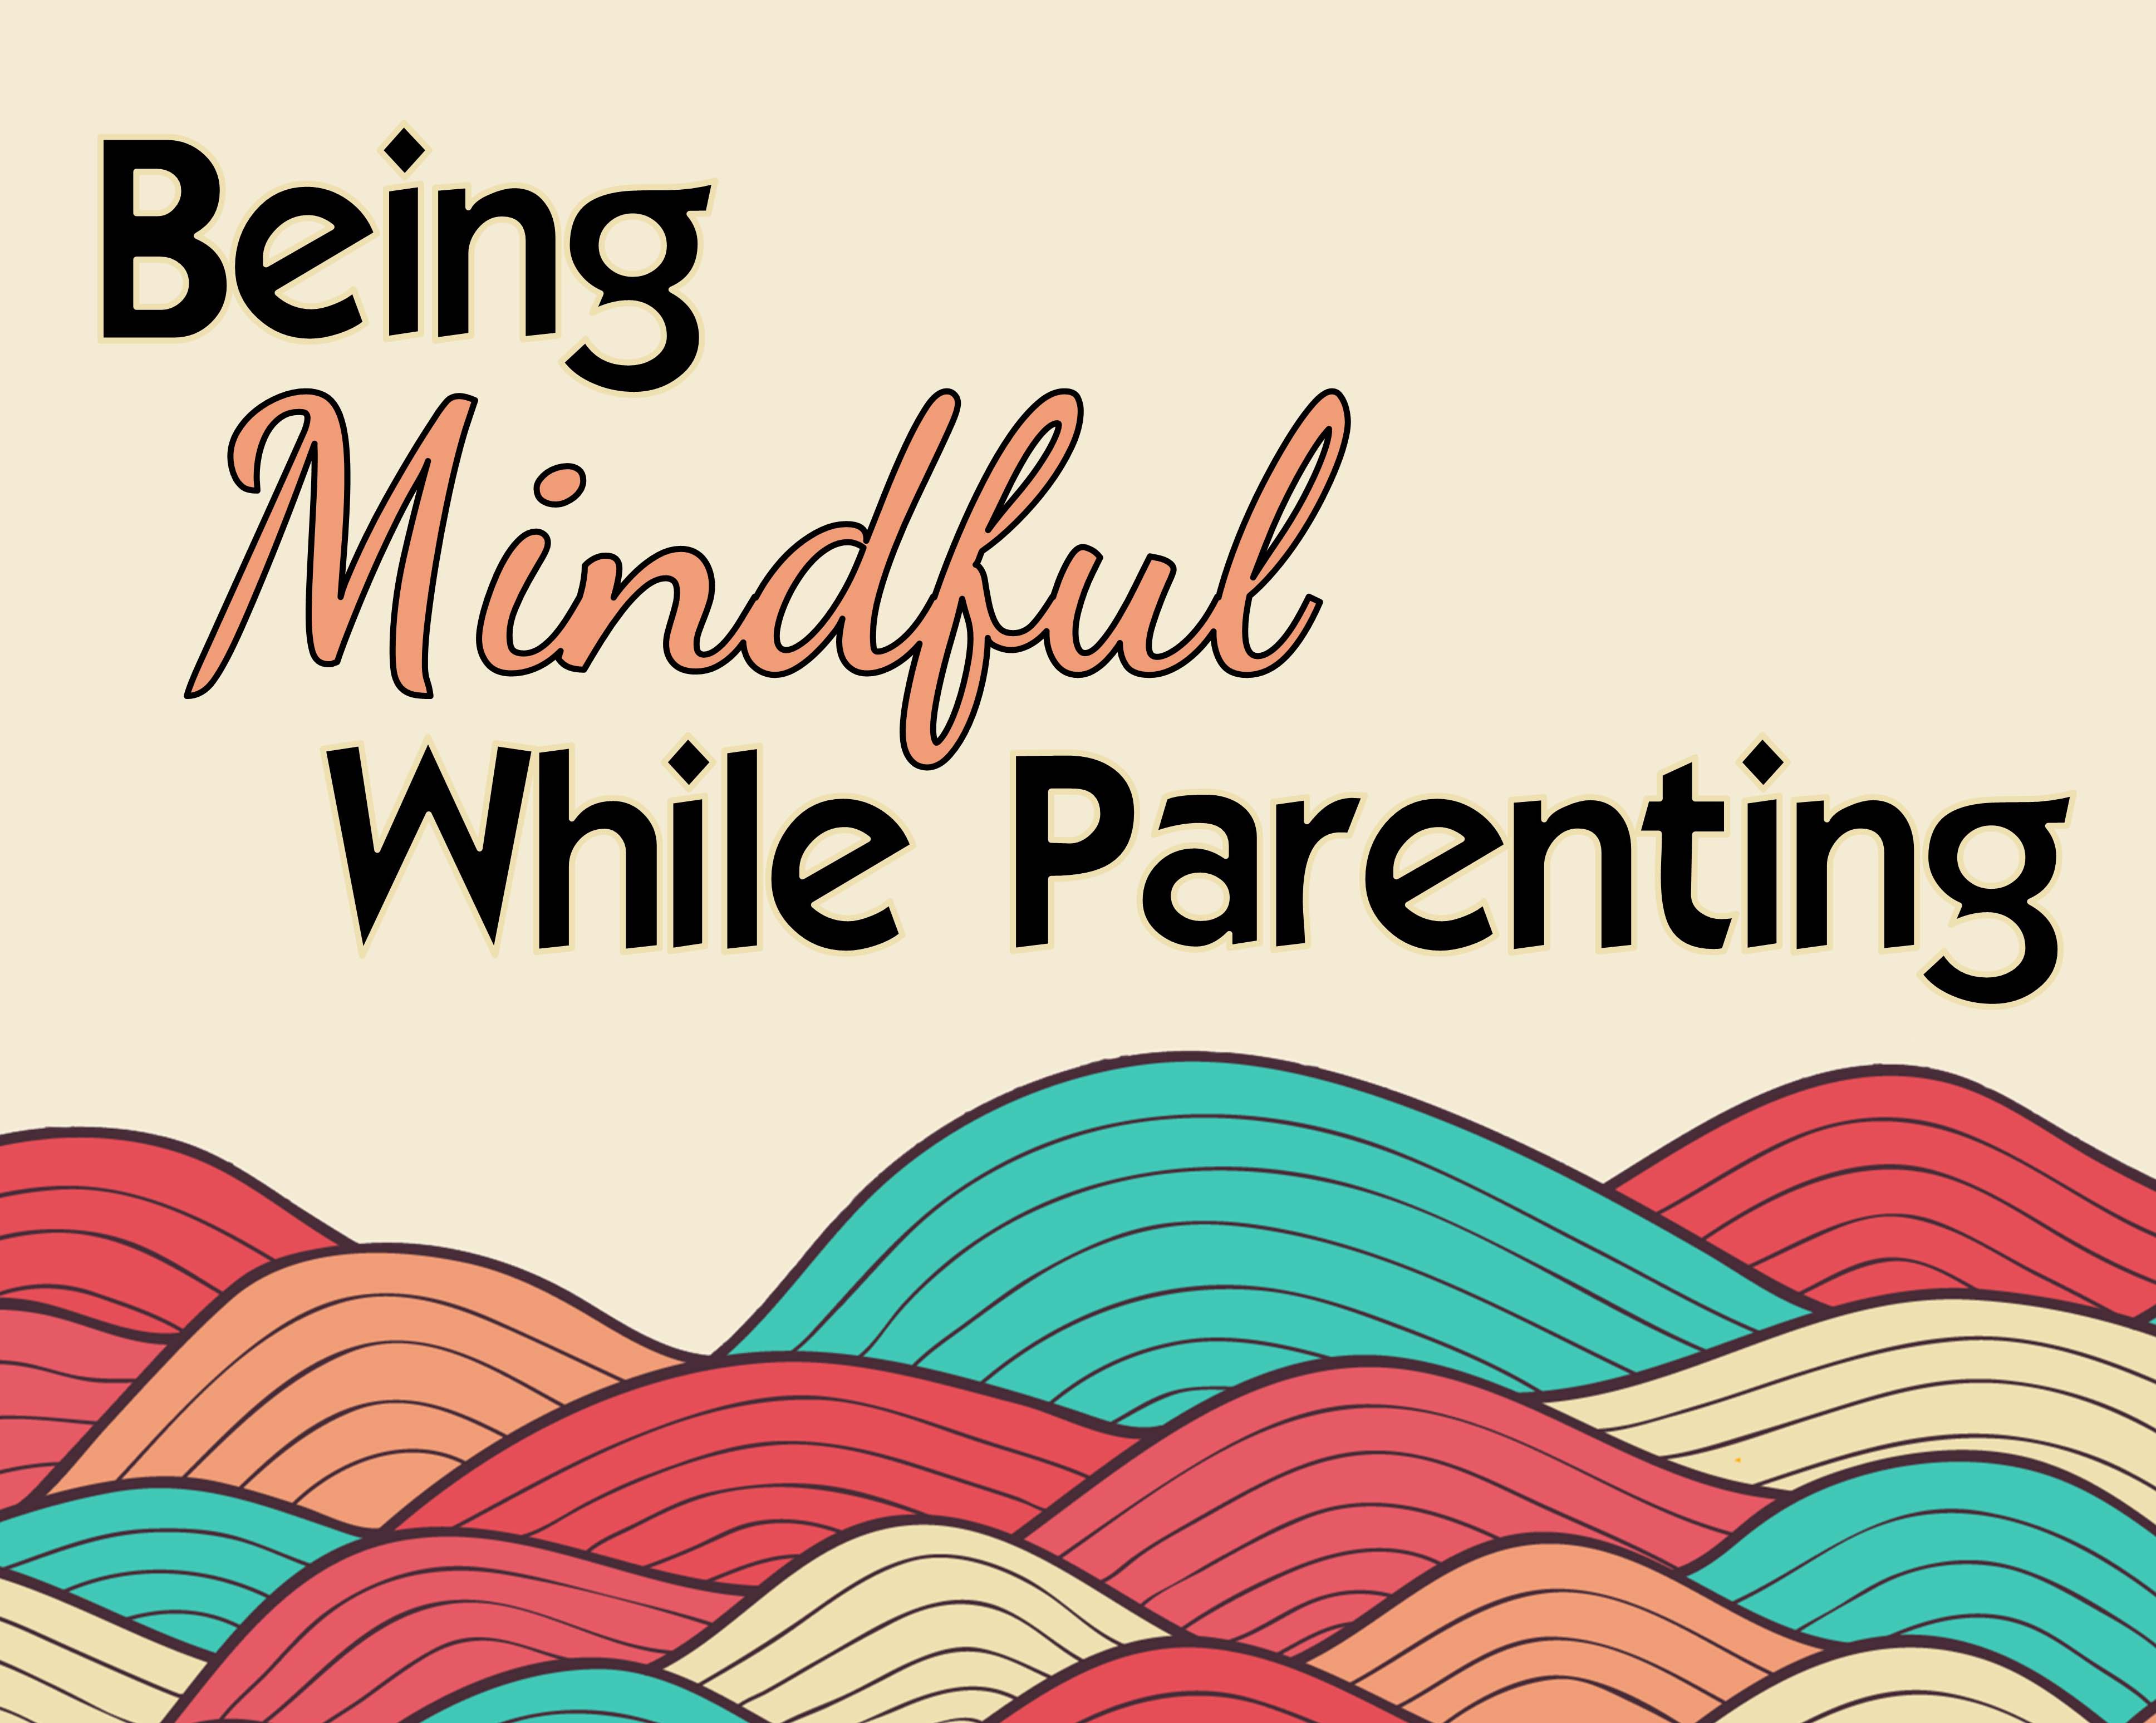 Being Mindful While Parenting - logo